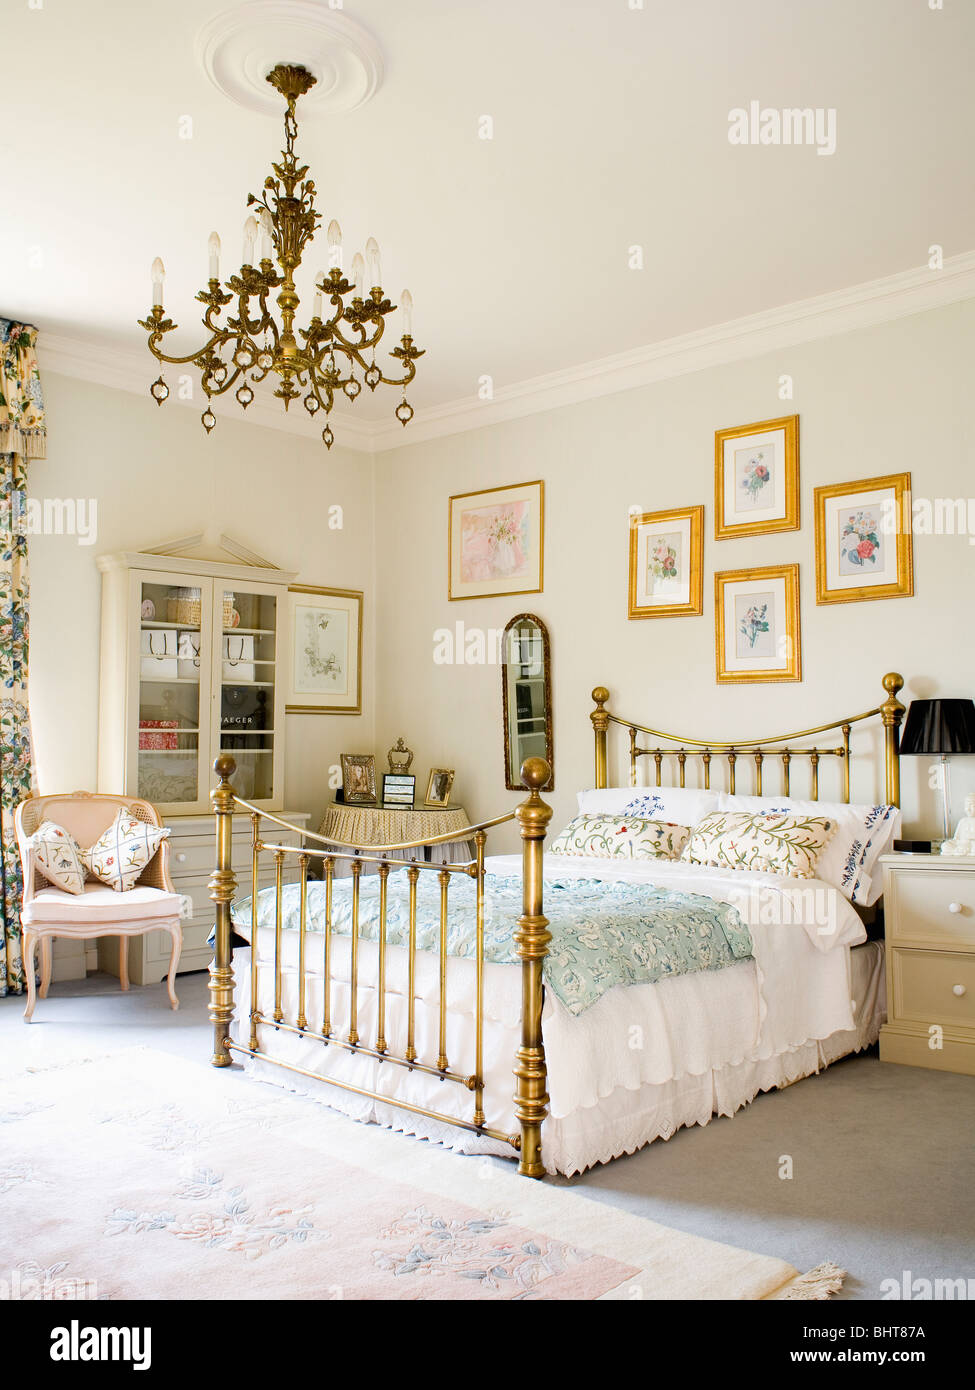 Brass chandelier and antique brass bed in traditional bedroom Stock Photo -  Alamy